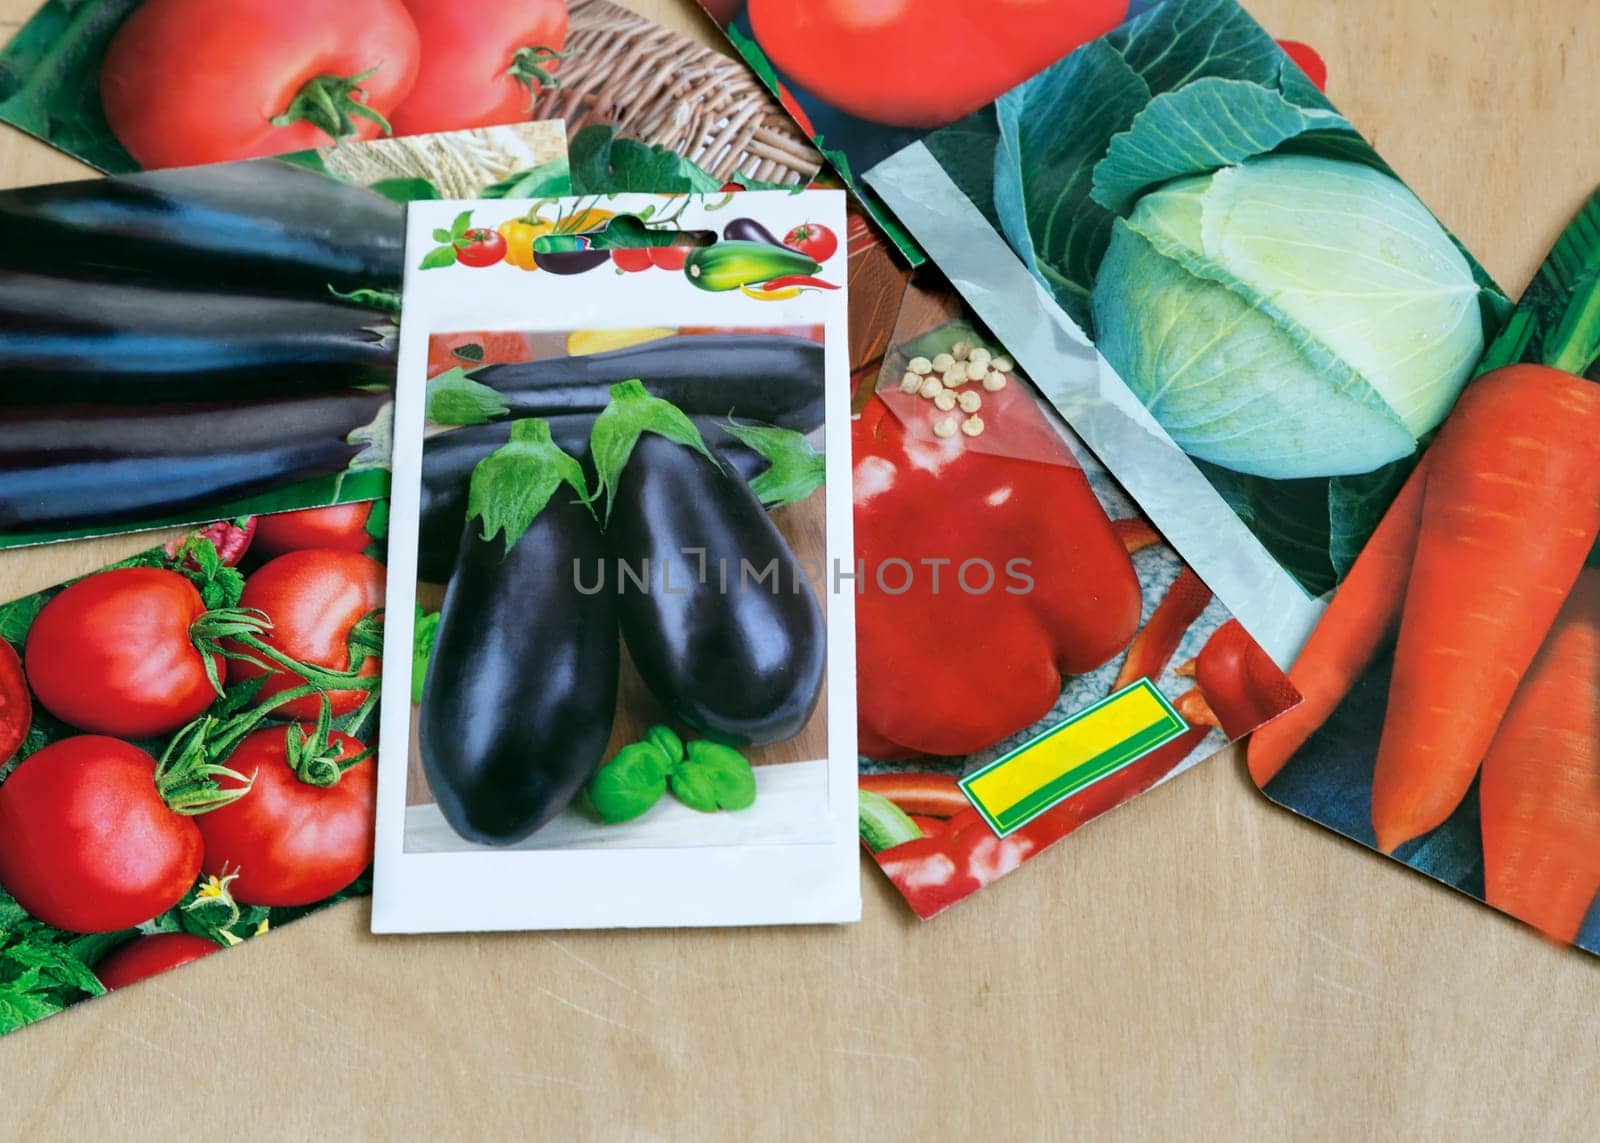 Vegetable seeds in small packages. by georgina198